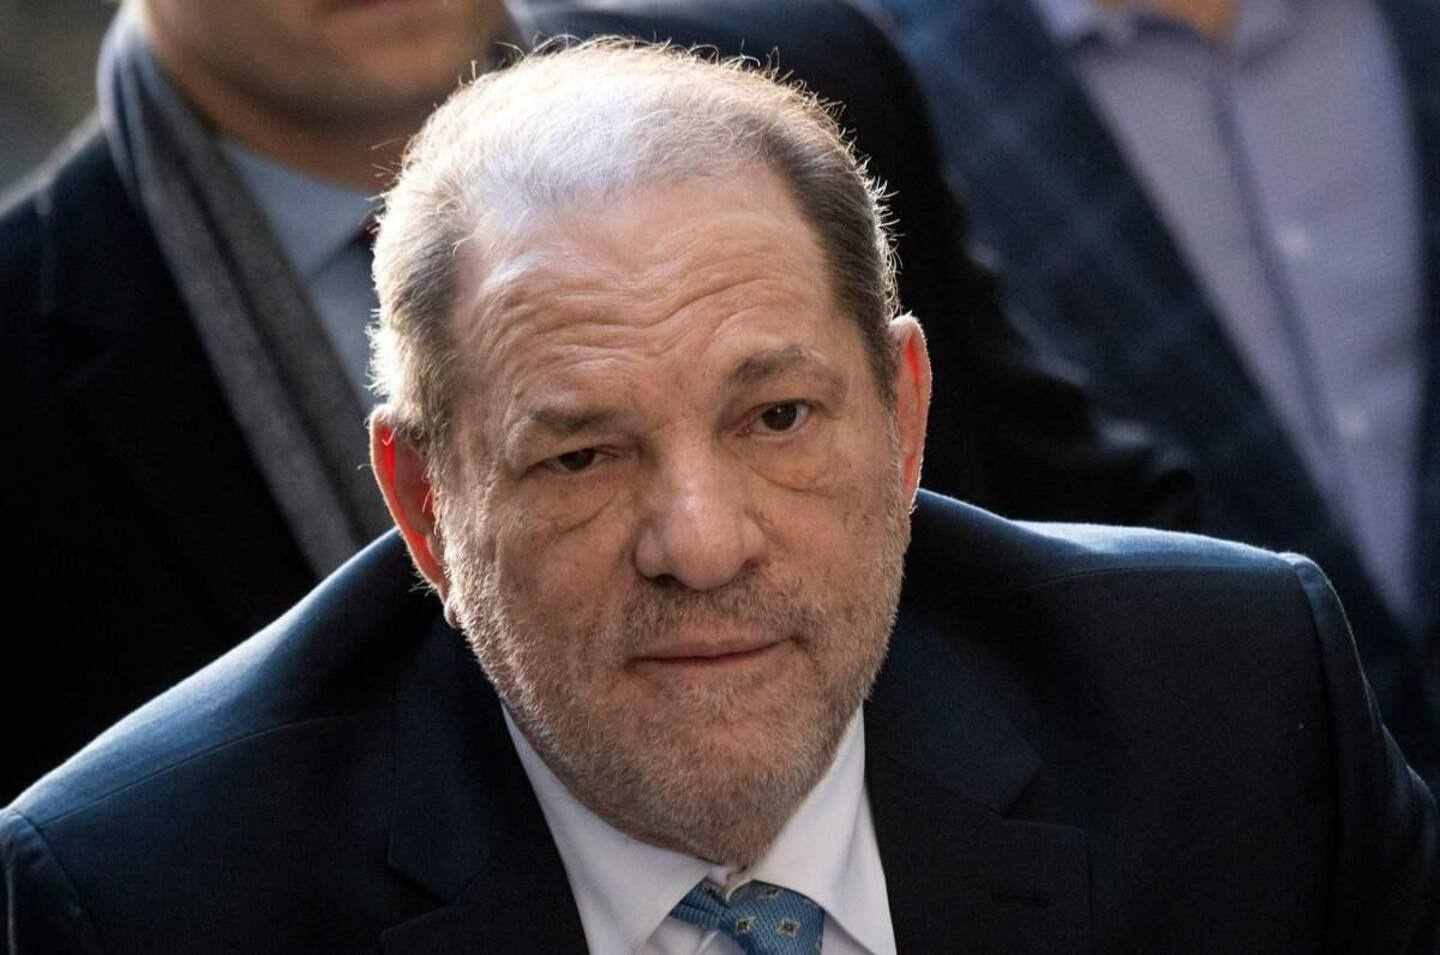 Appeal rejected for Harvey Weinstein after his conviction for sex crimes